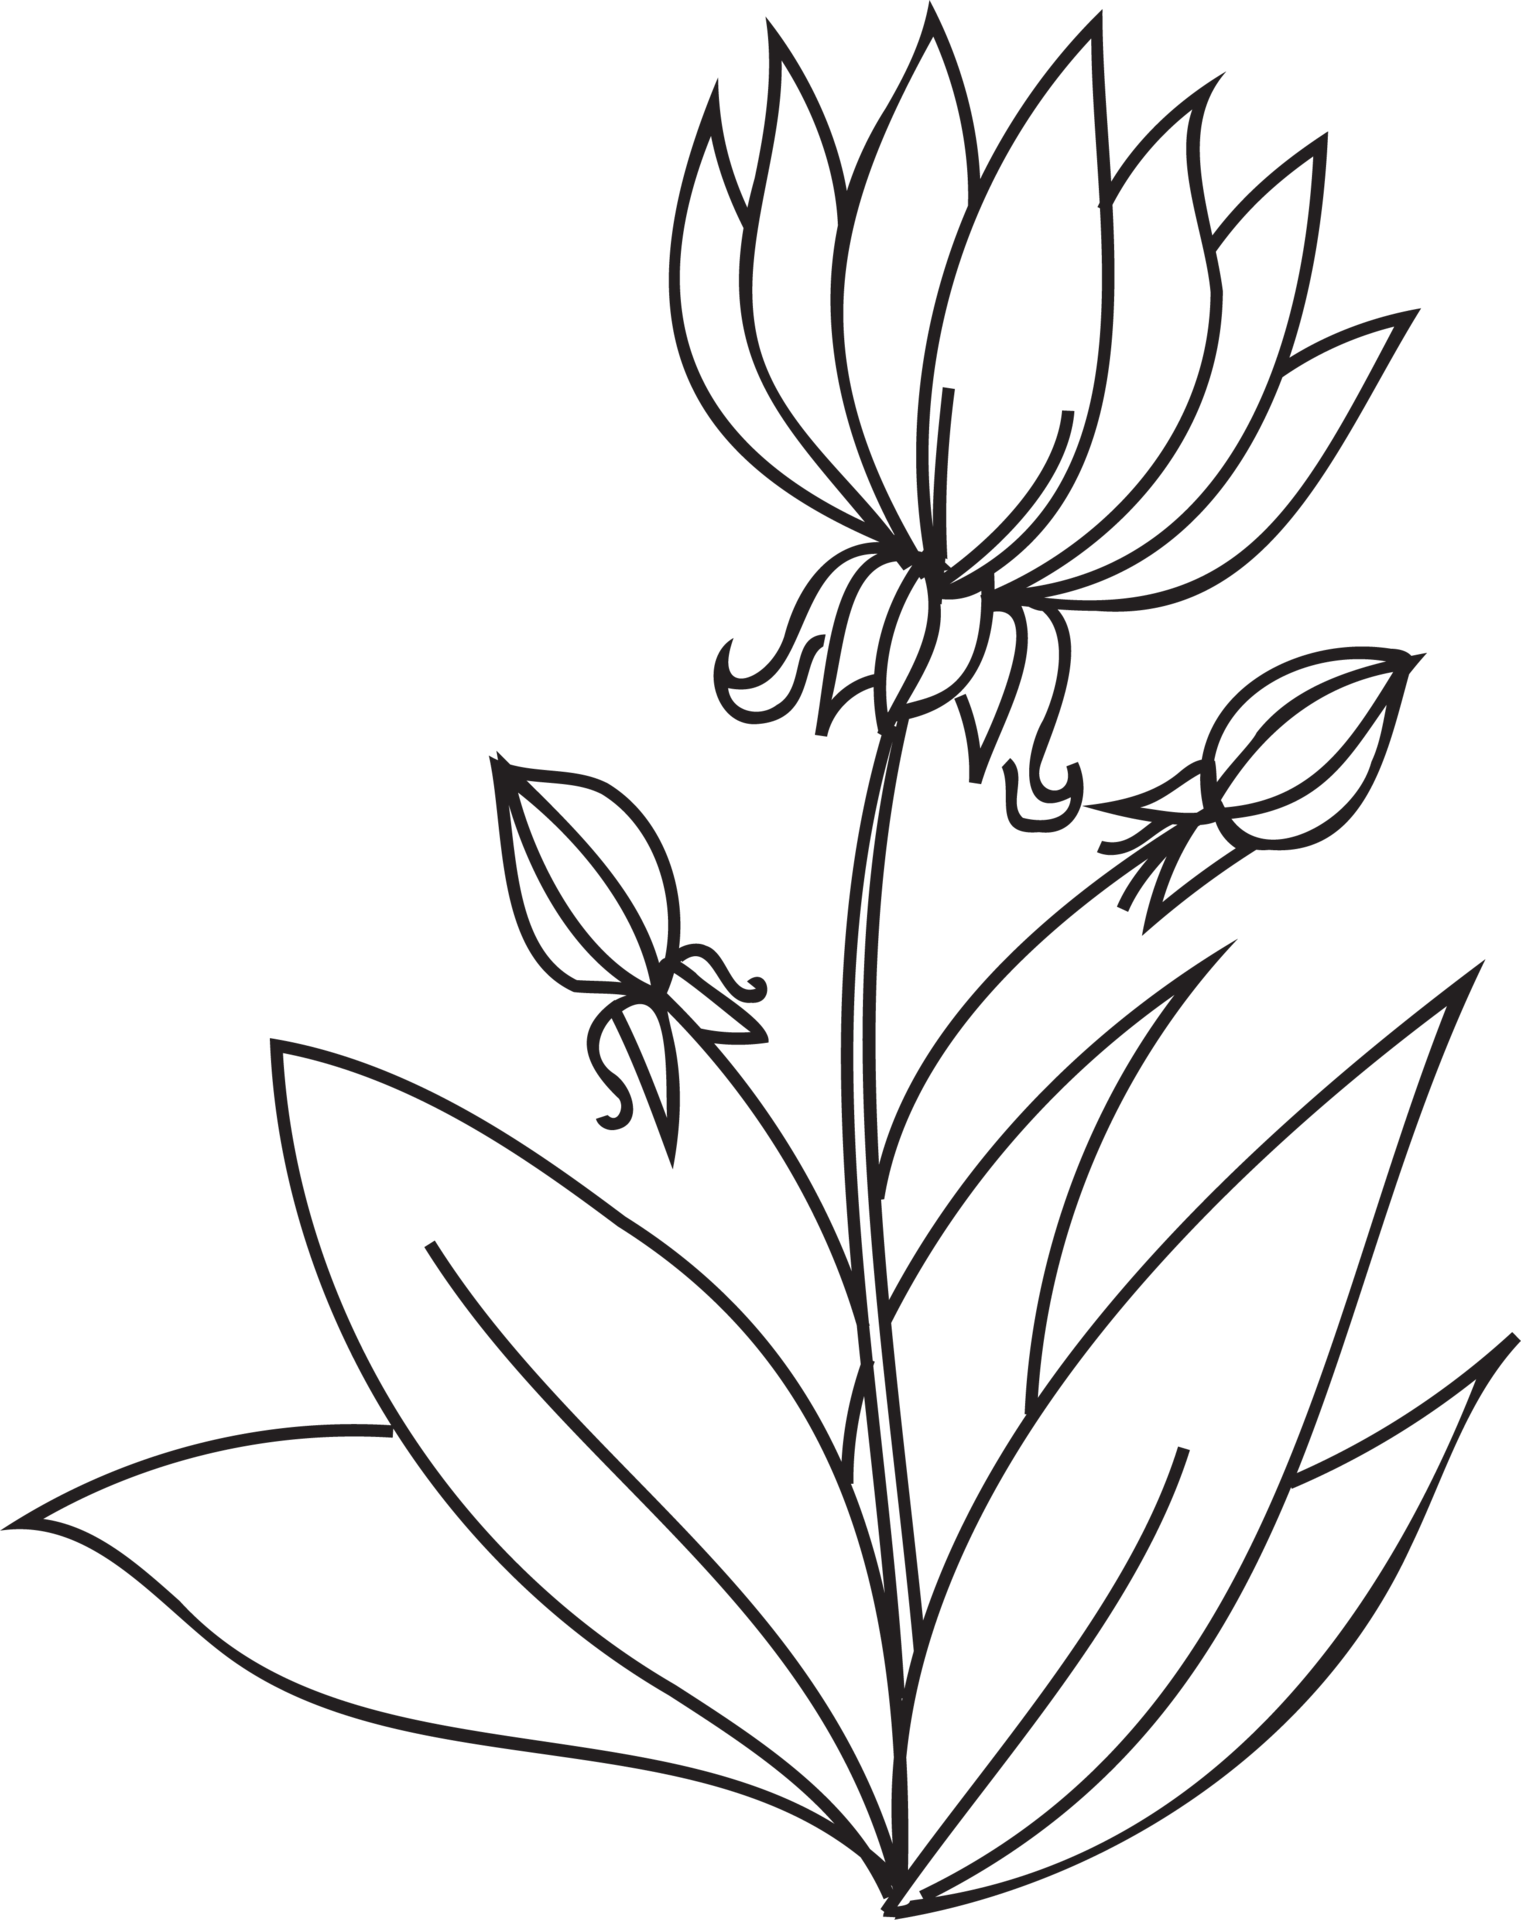 Flower line art illustration with black thin line. PNG with transparent ...